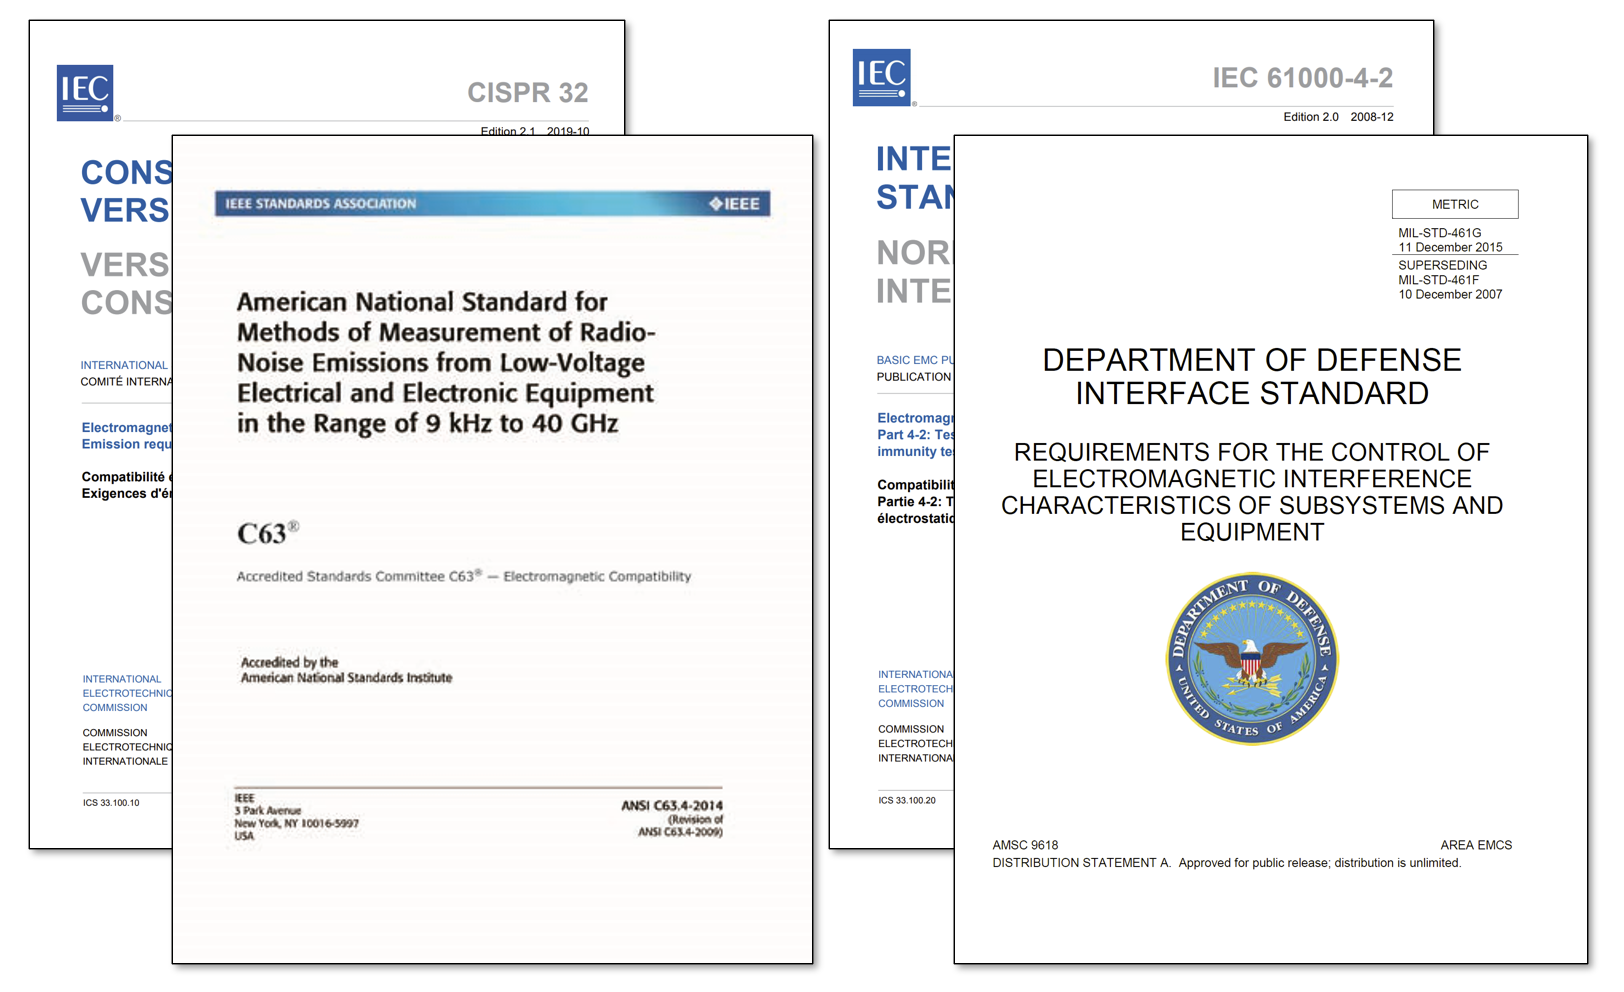 Covers of four EMC Standards